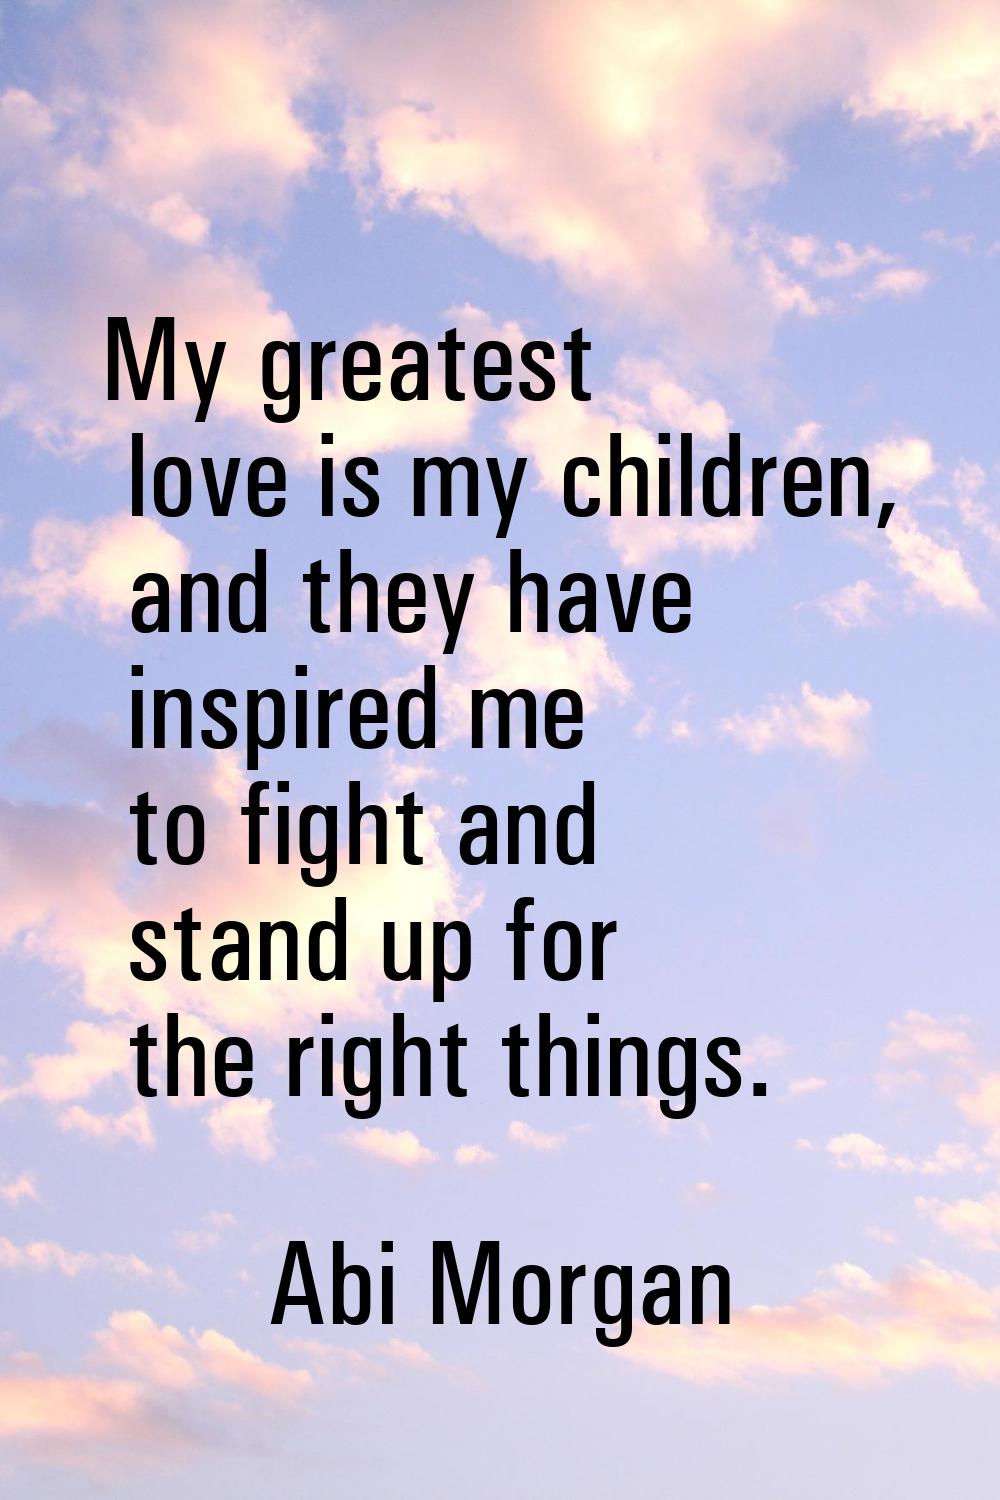 My greatest love is my children, and they have inspired me to fight and stand up for the right thin